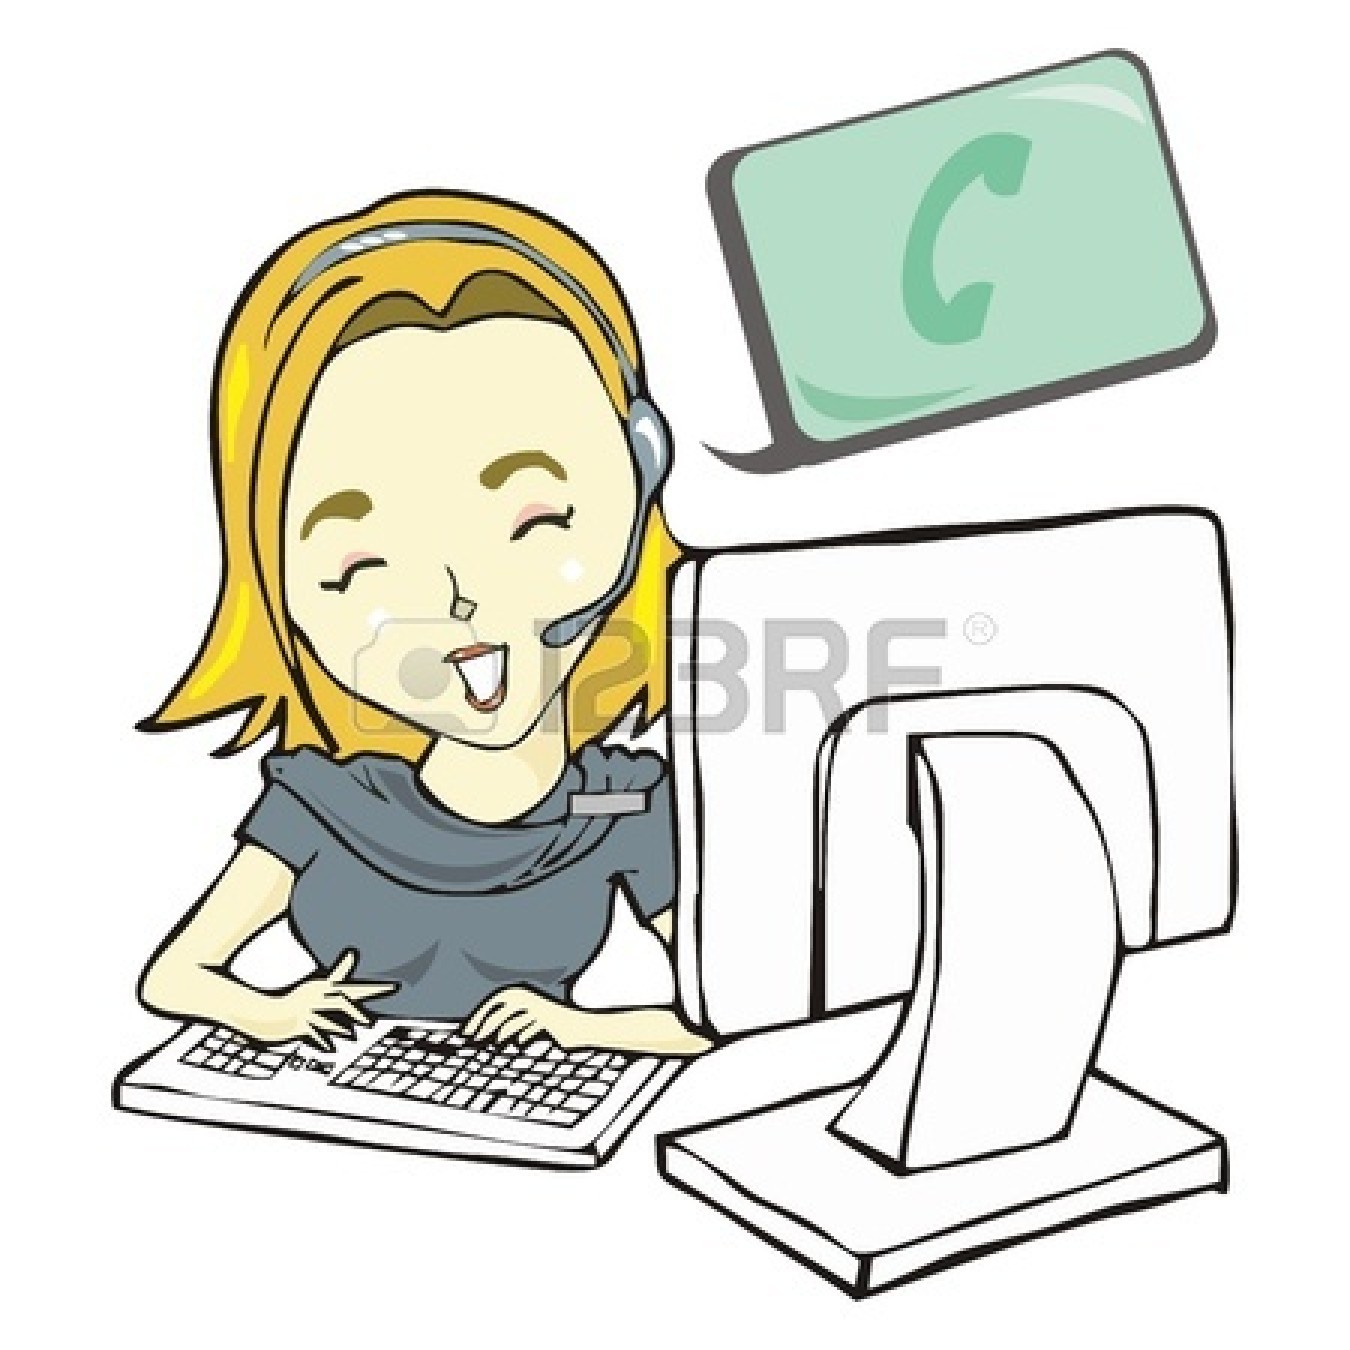 Computer Center   Clipart Panda   Free Clipart Images